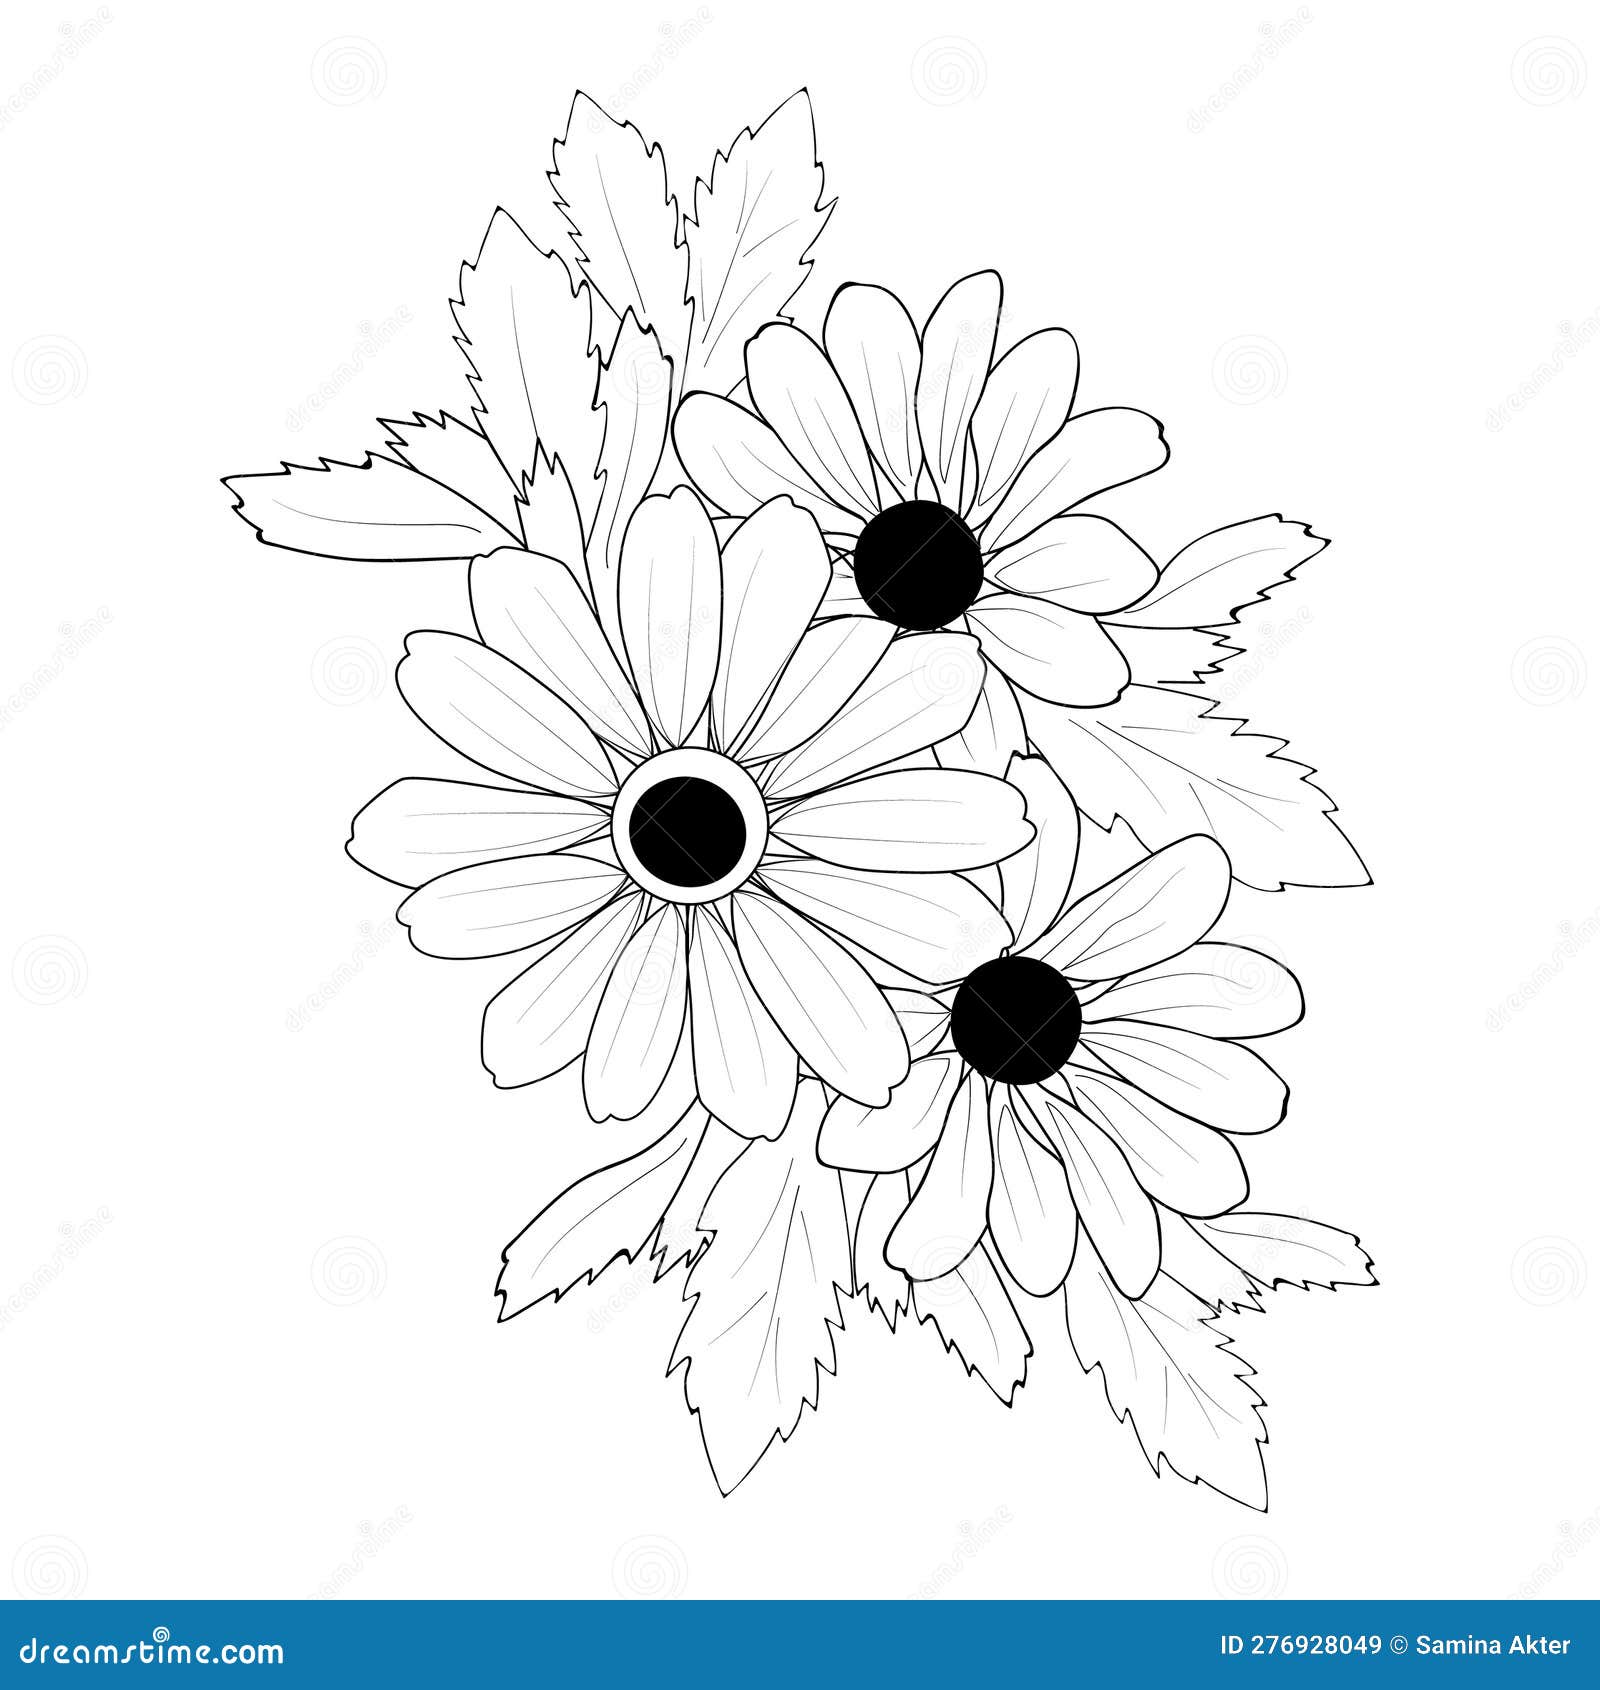 dharmil sheth recommends black eyed susan tattoo designs pic